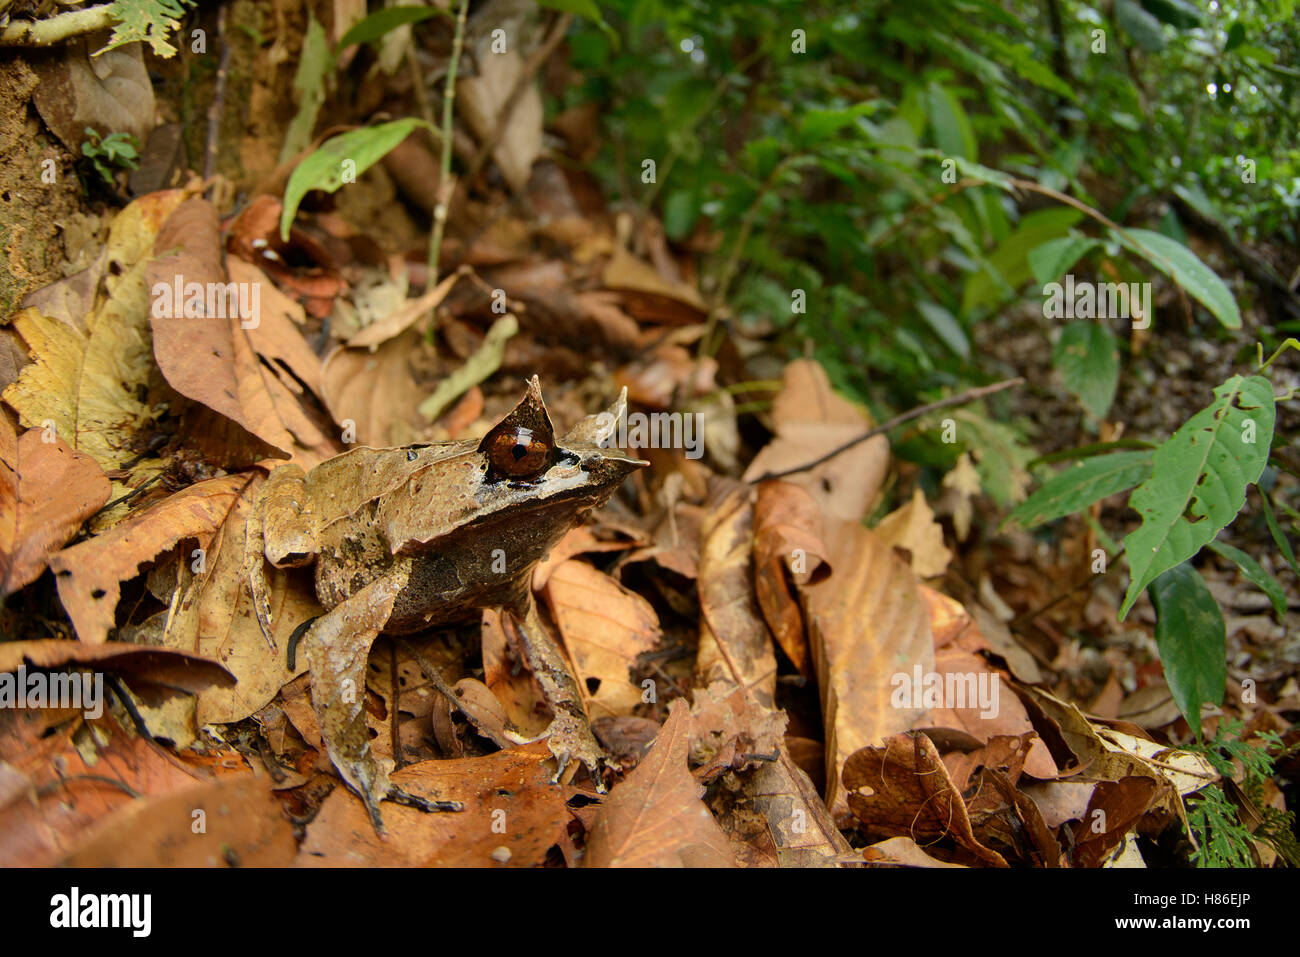 Asian Horned Frog (Megophrys nasuta) camouflaged in leaf litter, Danum Valley Field Center, Sabah, Borneo, Malaysia Stock Photo